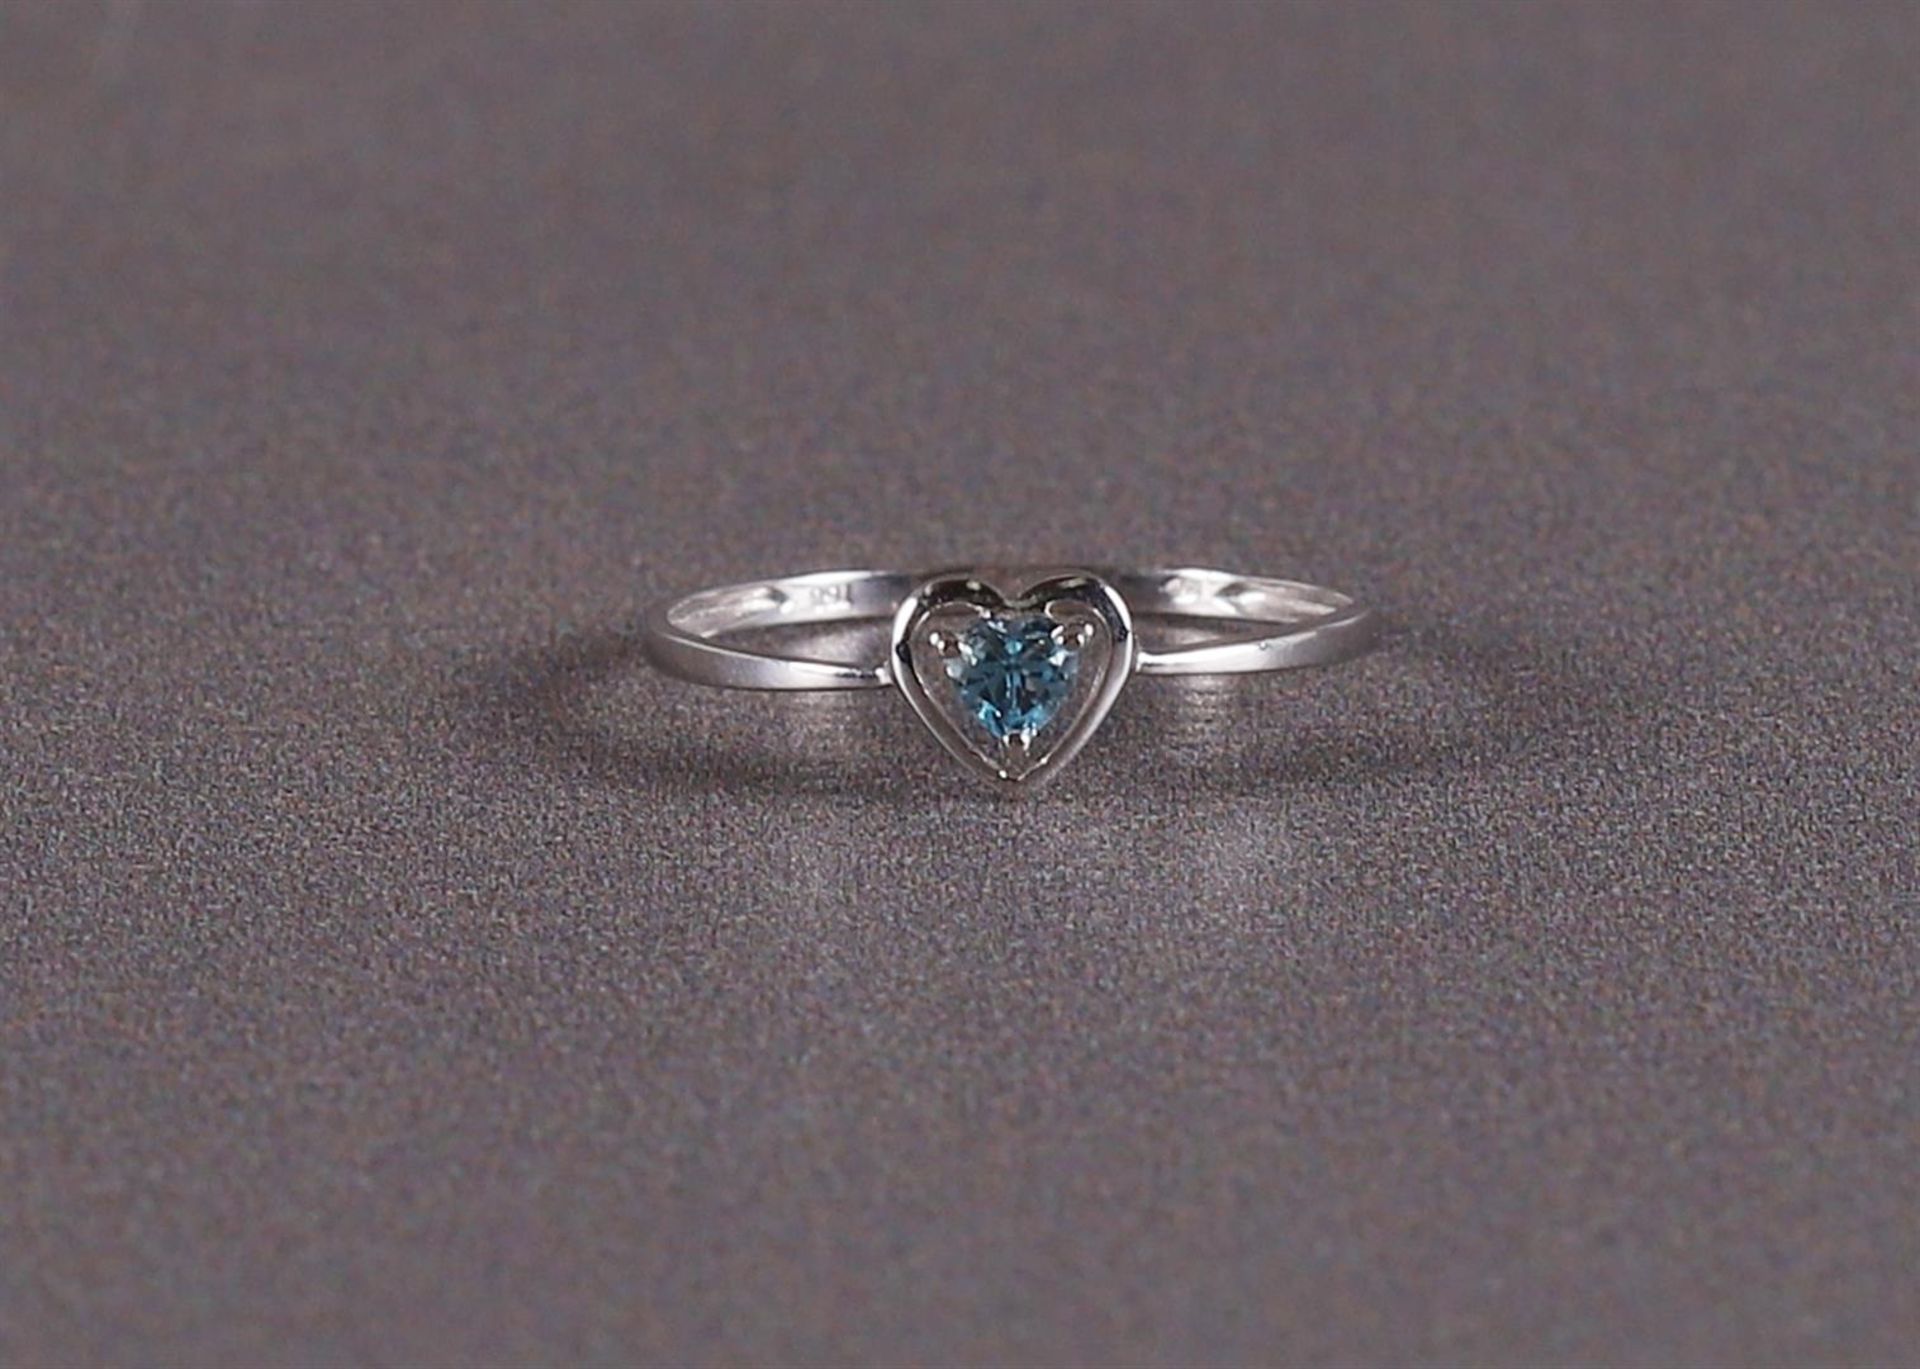 An 18 kt gold ring with a heart-shaped cut aquamarine